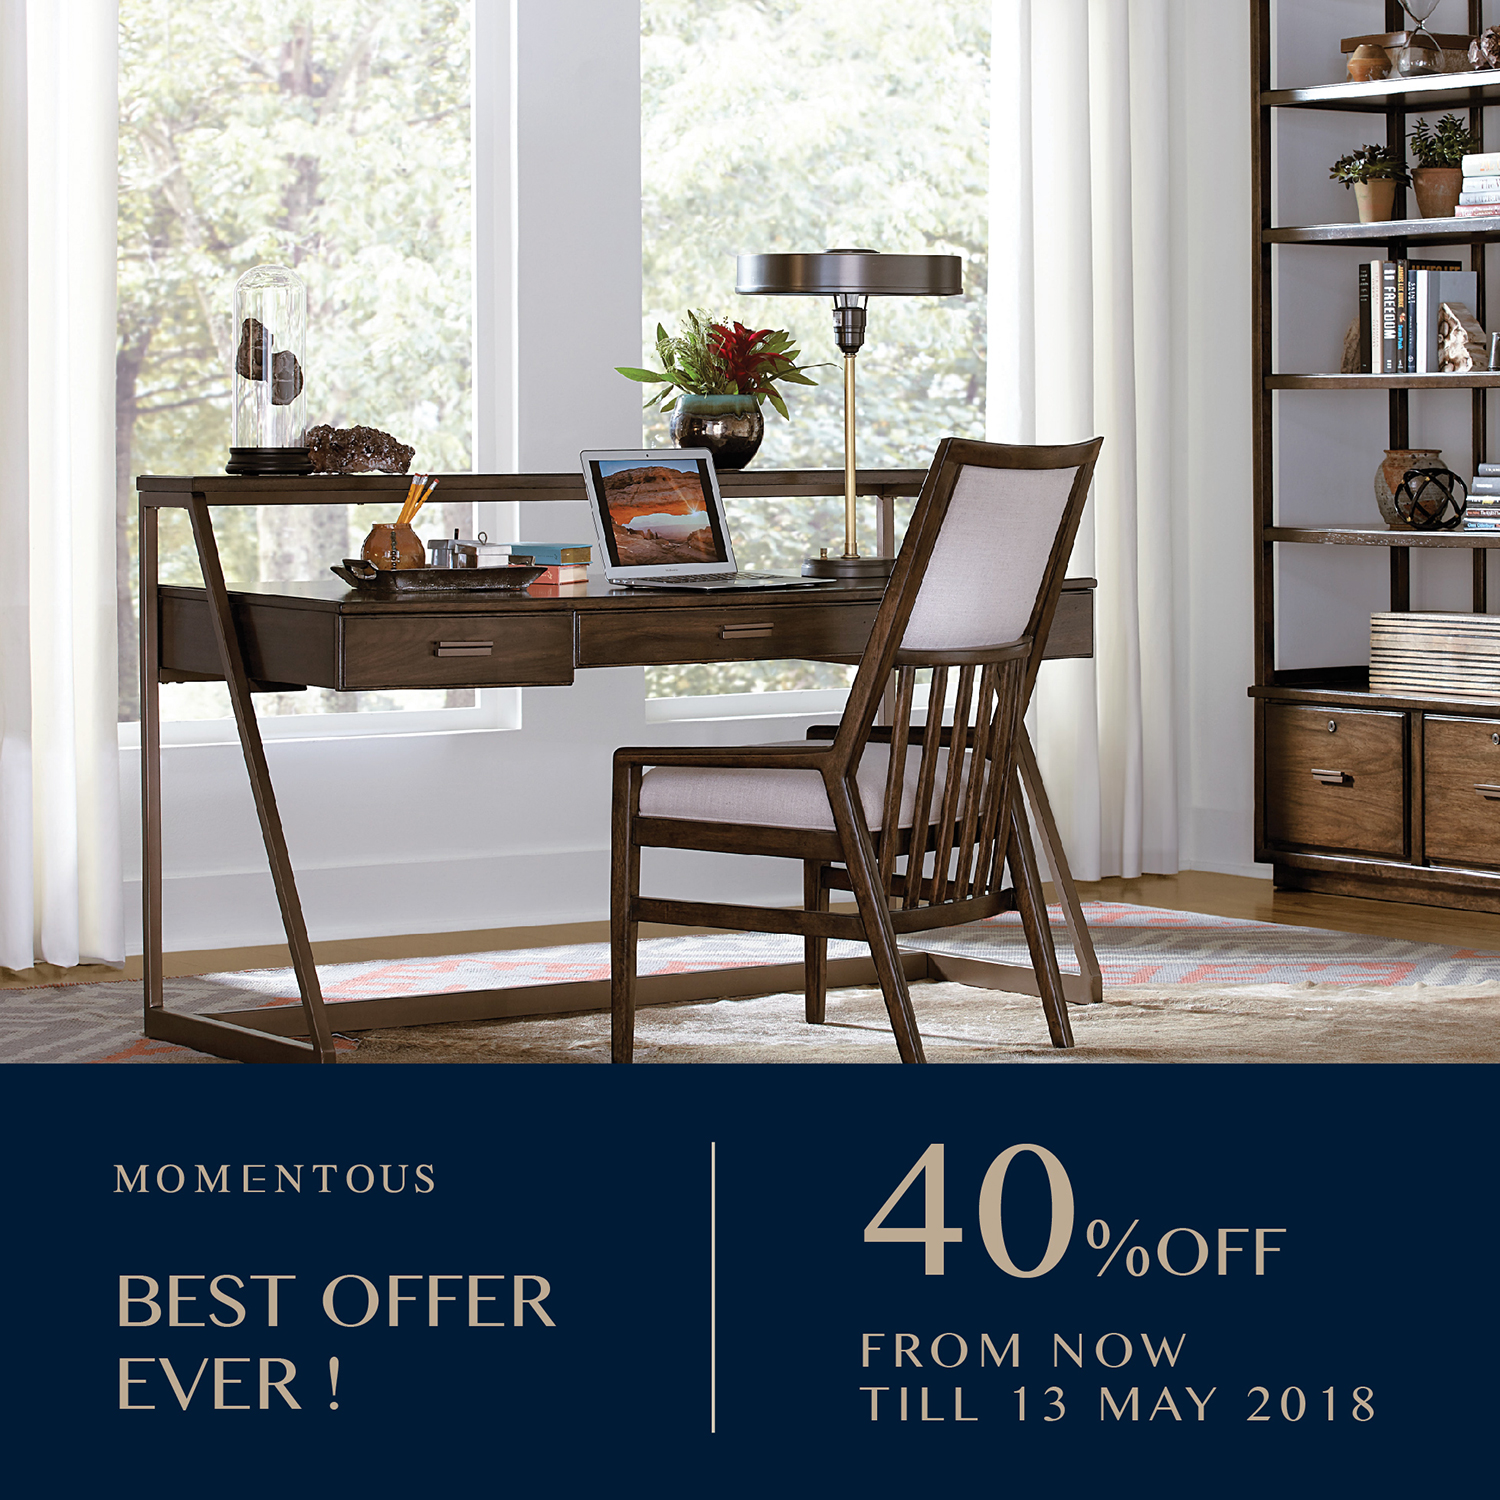 Best Offer Ever! Up to 40% Off 